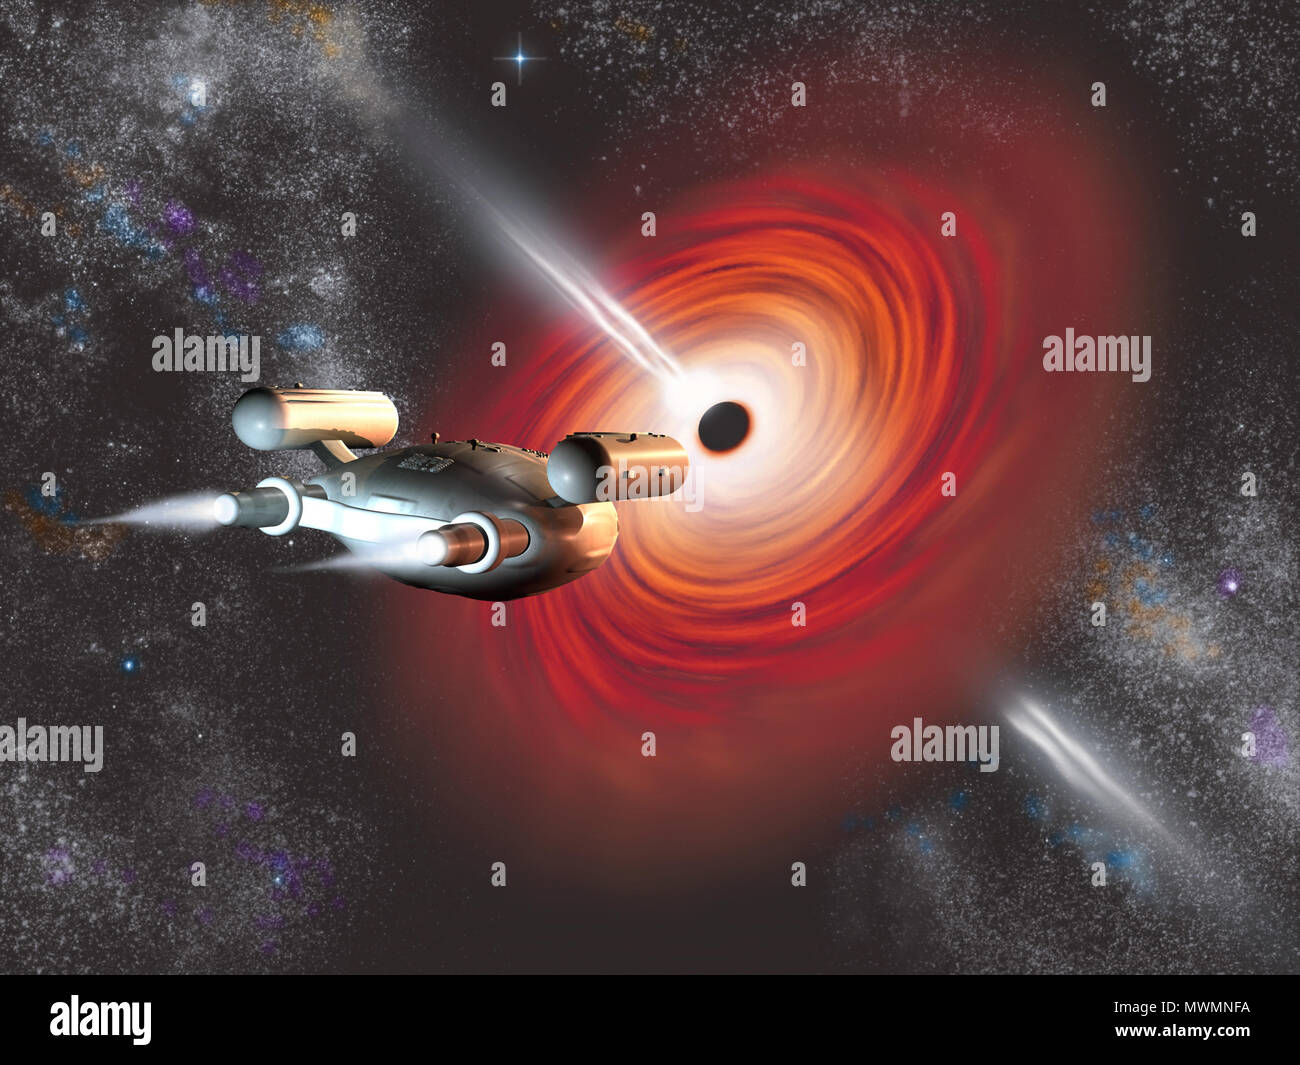 Spacecraft going into a black hole Stock Photo